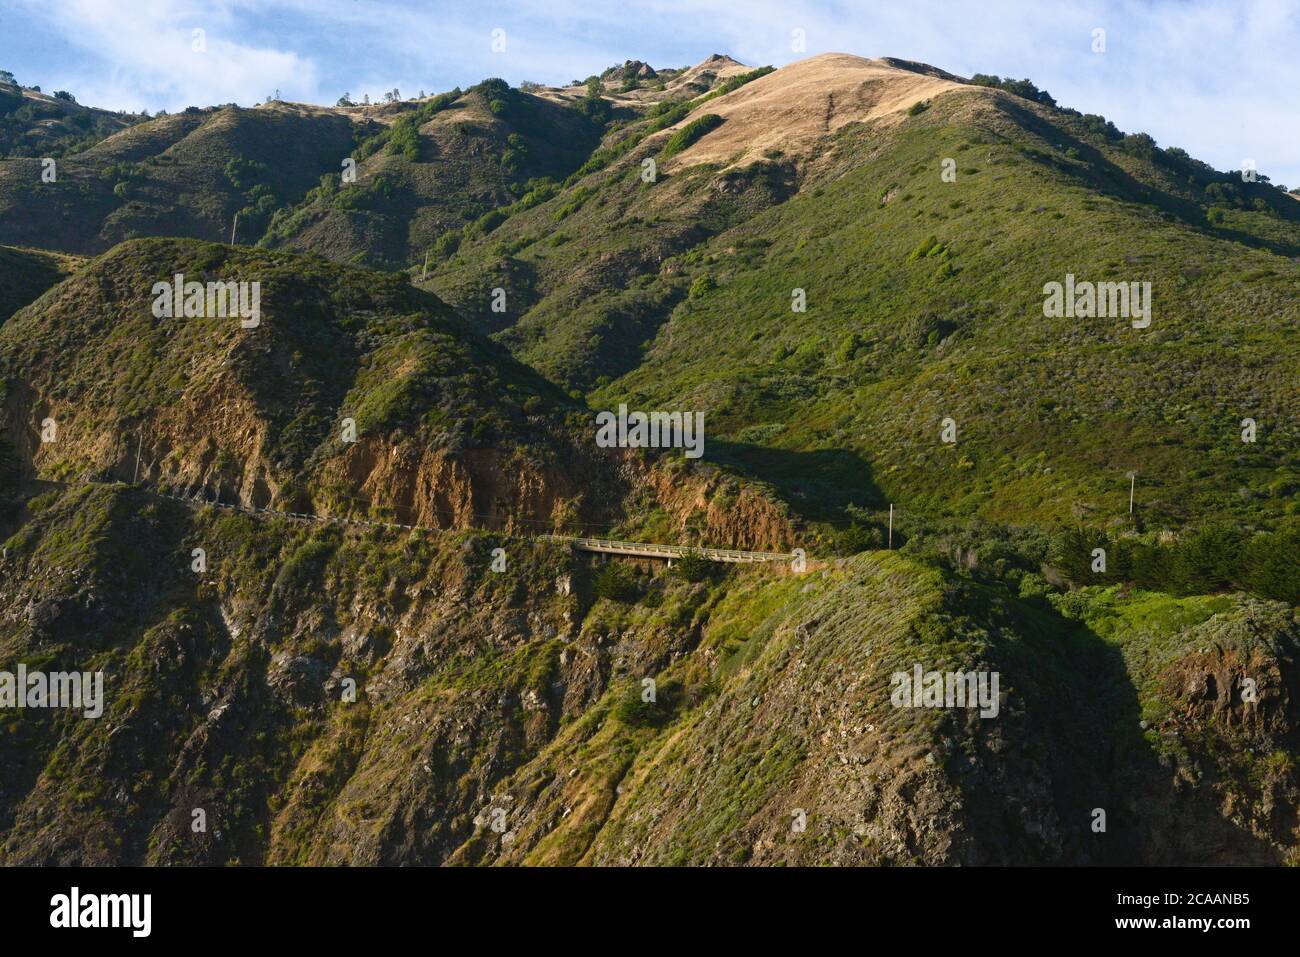 Magnificent, majestic landscape of mountainous area of Ragged Big Sur of central coast, breathe taking views inspiring bliss, confidence and peace.. Stock Photo